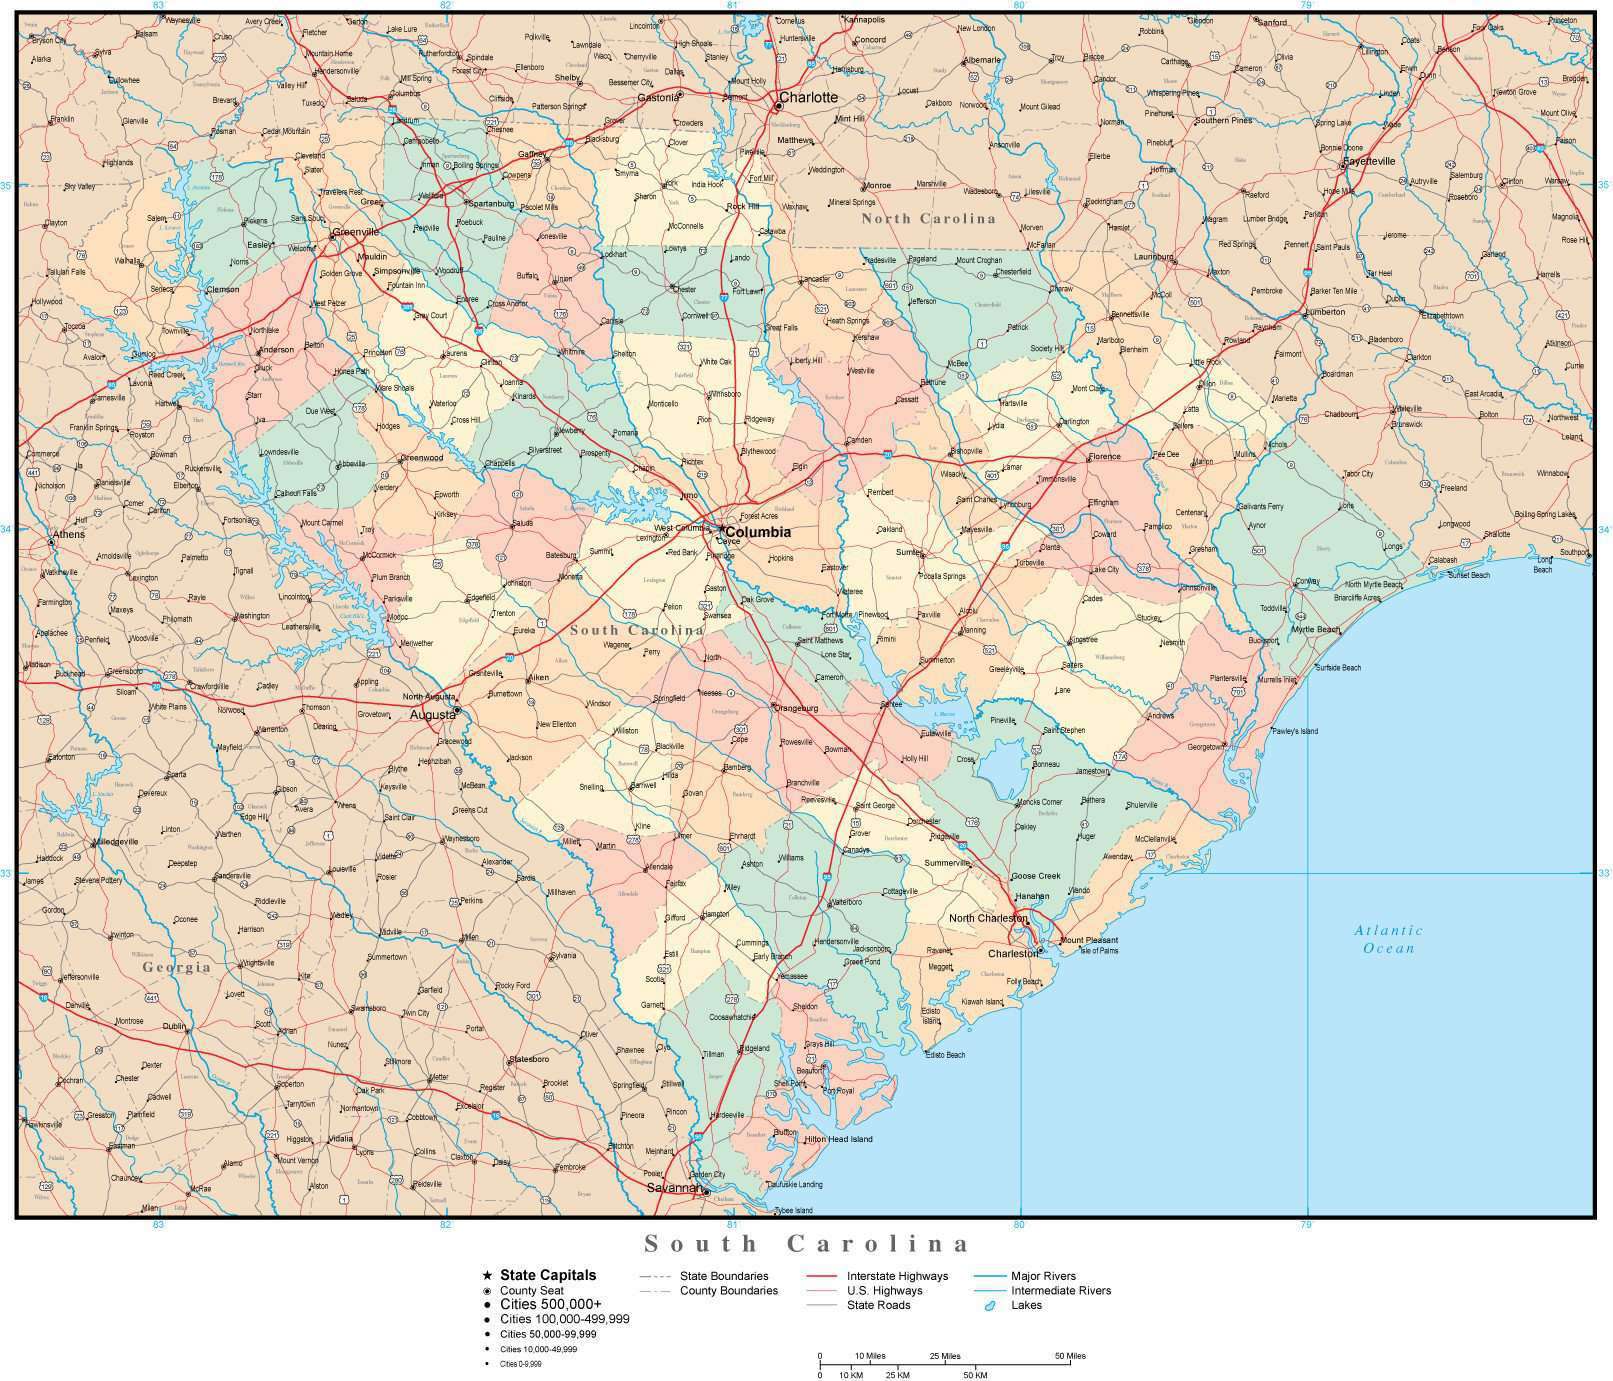 South Carolina Adobe Illustrator Map With Counties Cities County